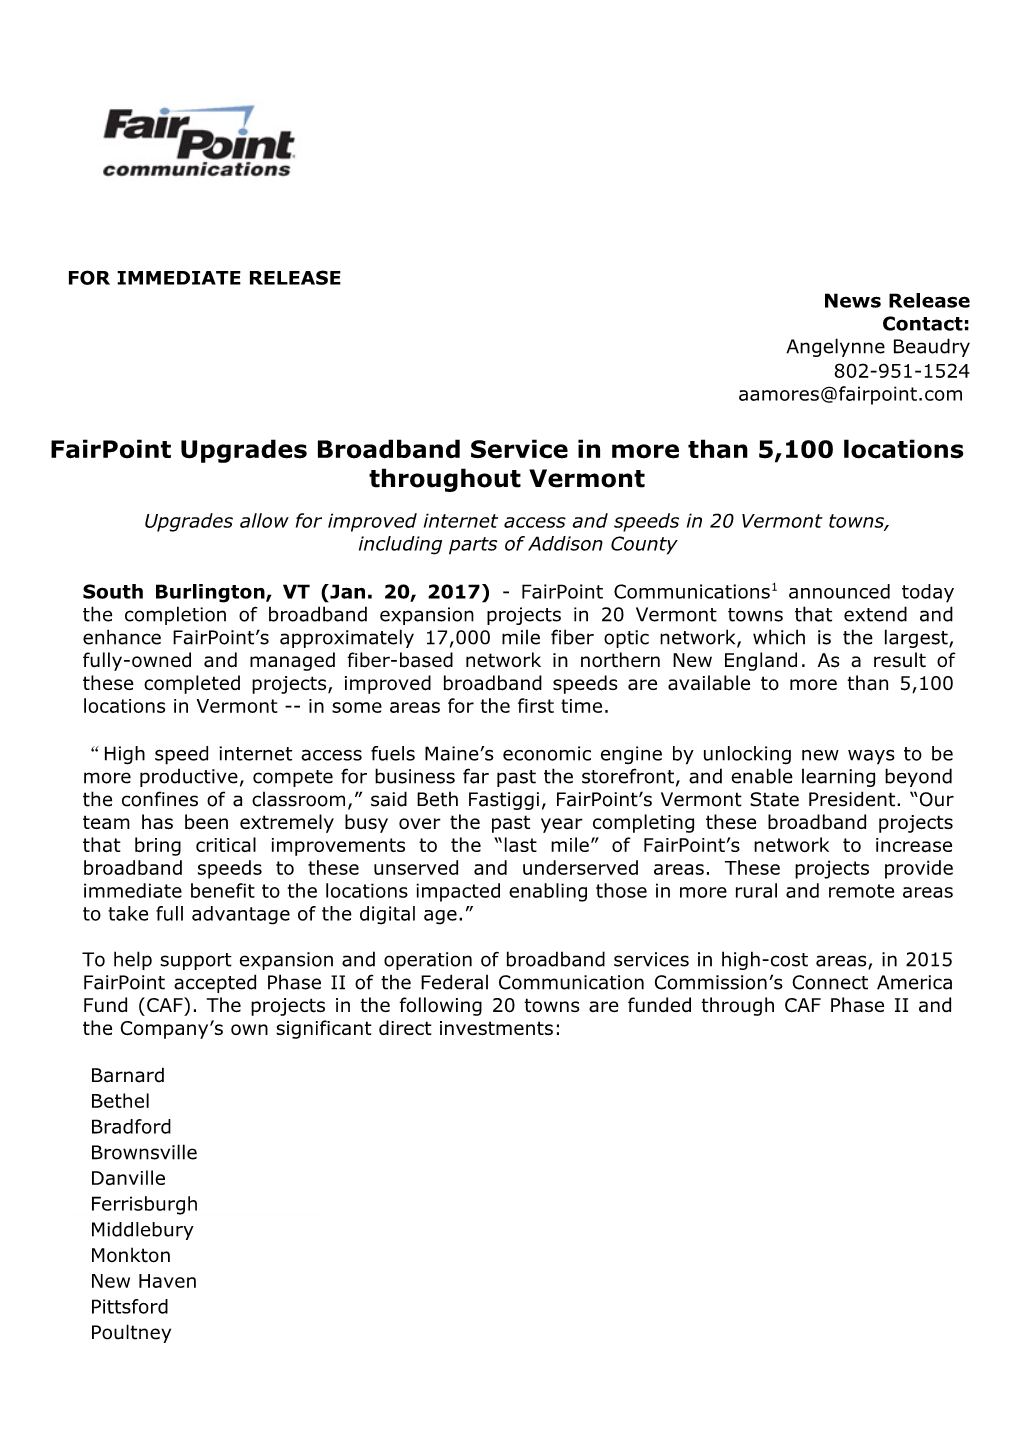 Fairpoint Upgrades Broadband Service in More Than 5,100 Locations Throughout Vermont s1